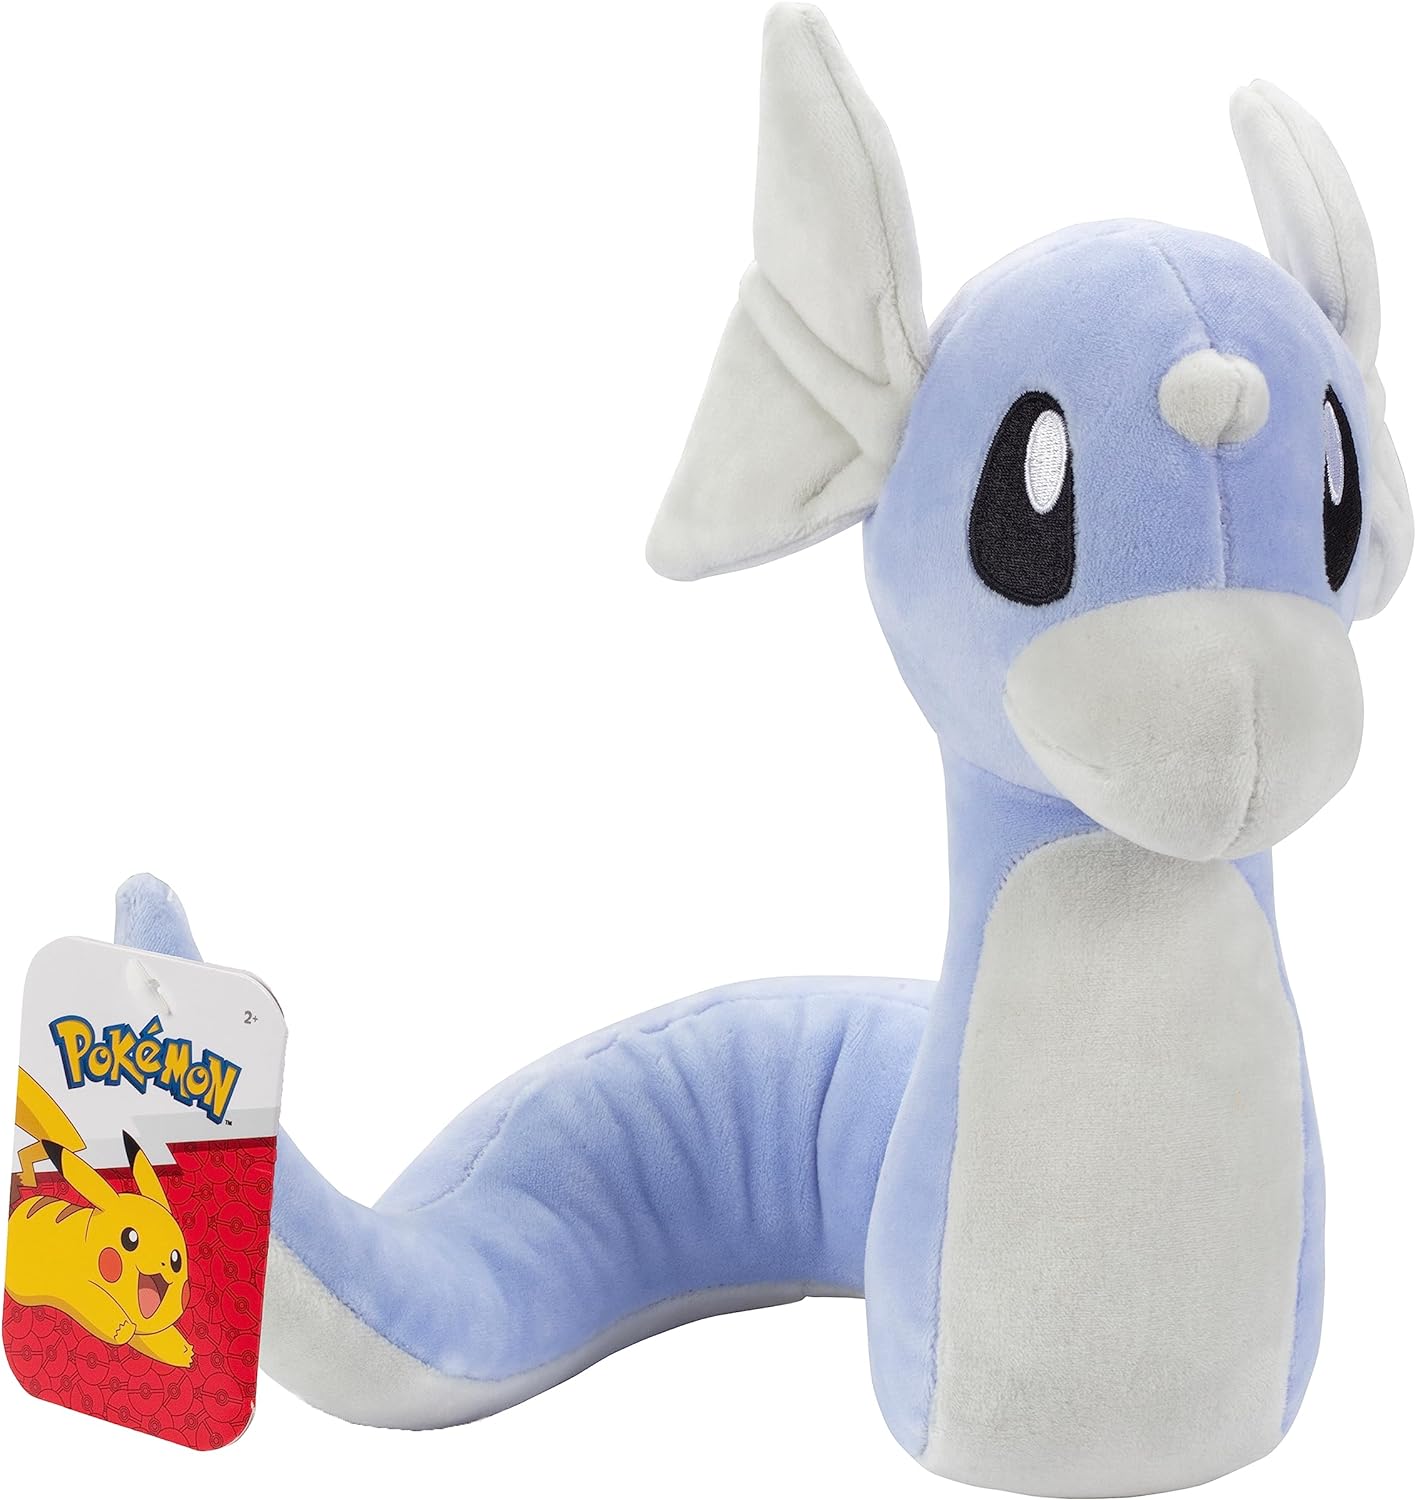 Pokemon ALL STAR COLLECTION Stuffed Toy Dratini Plush S Size Doll Pocket Monster